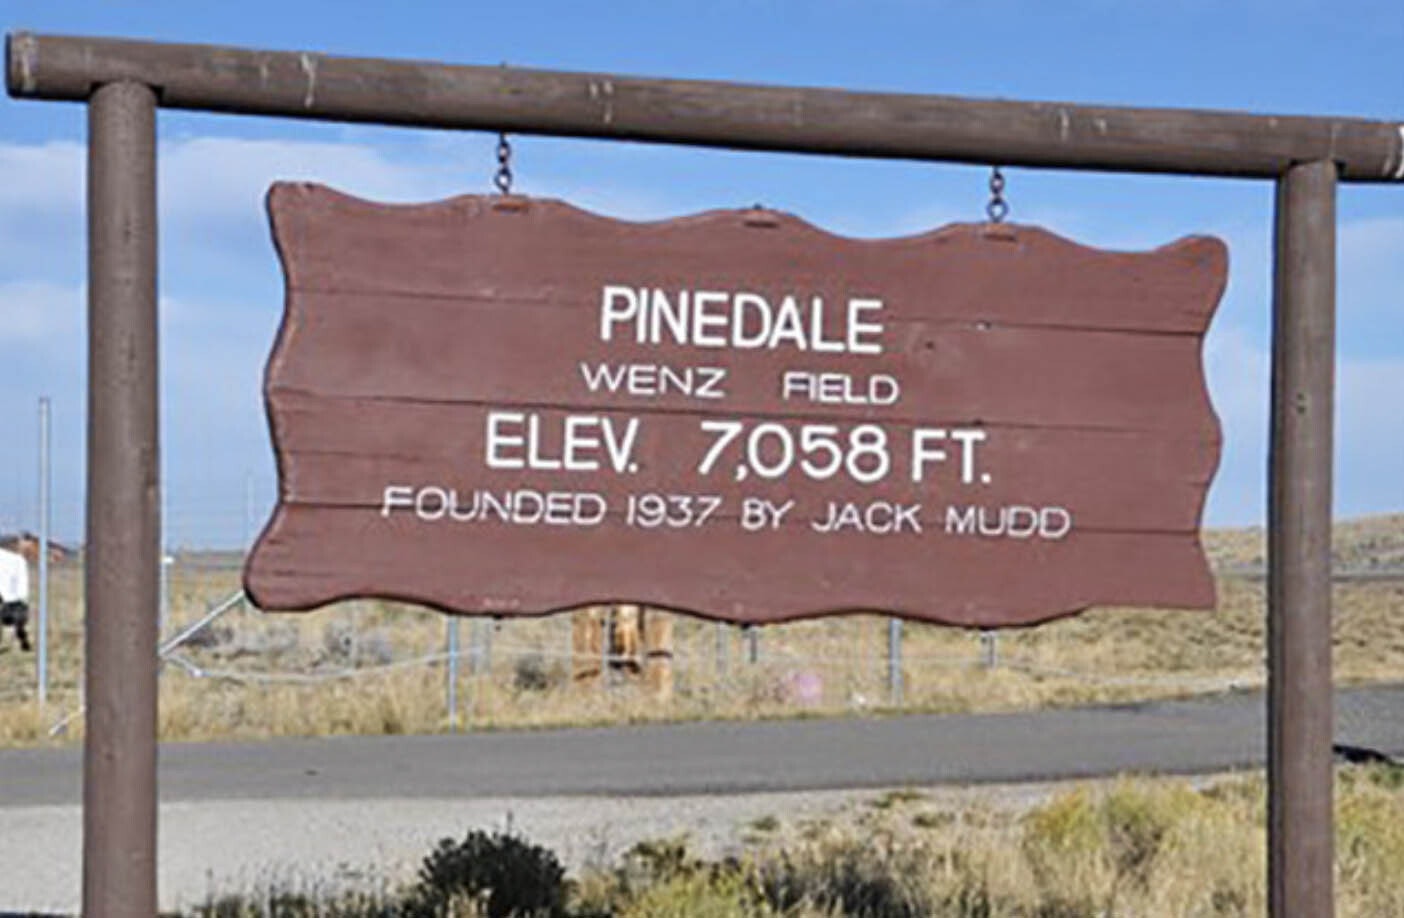 Pinedale airport